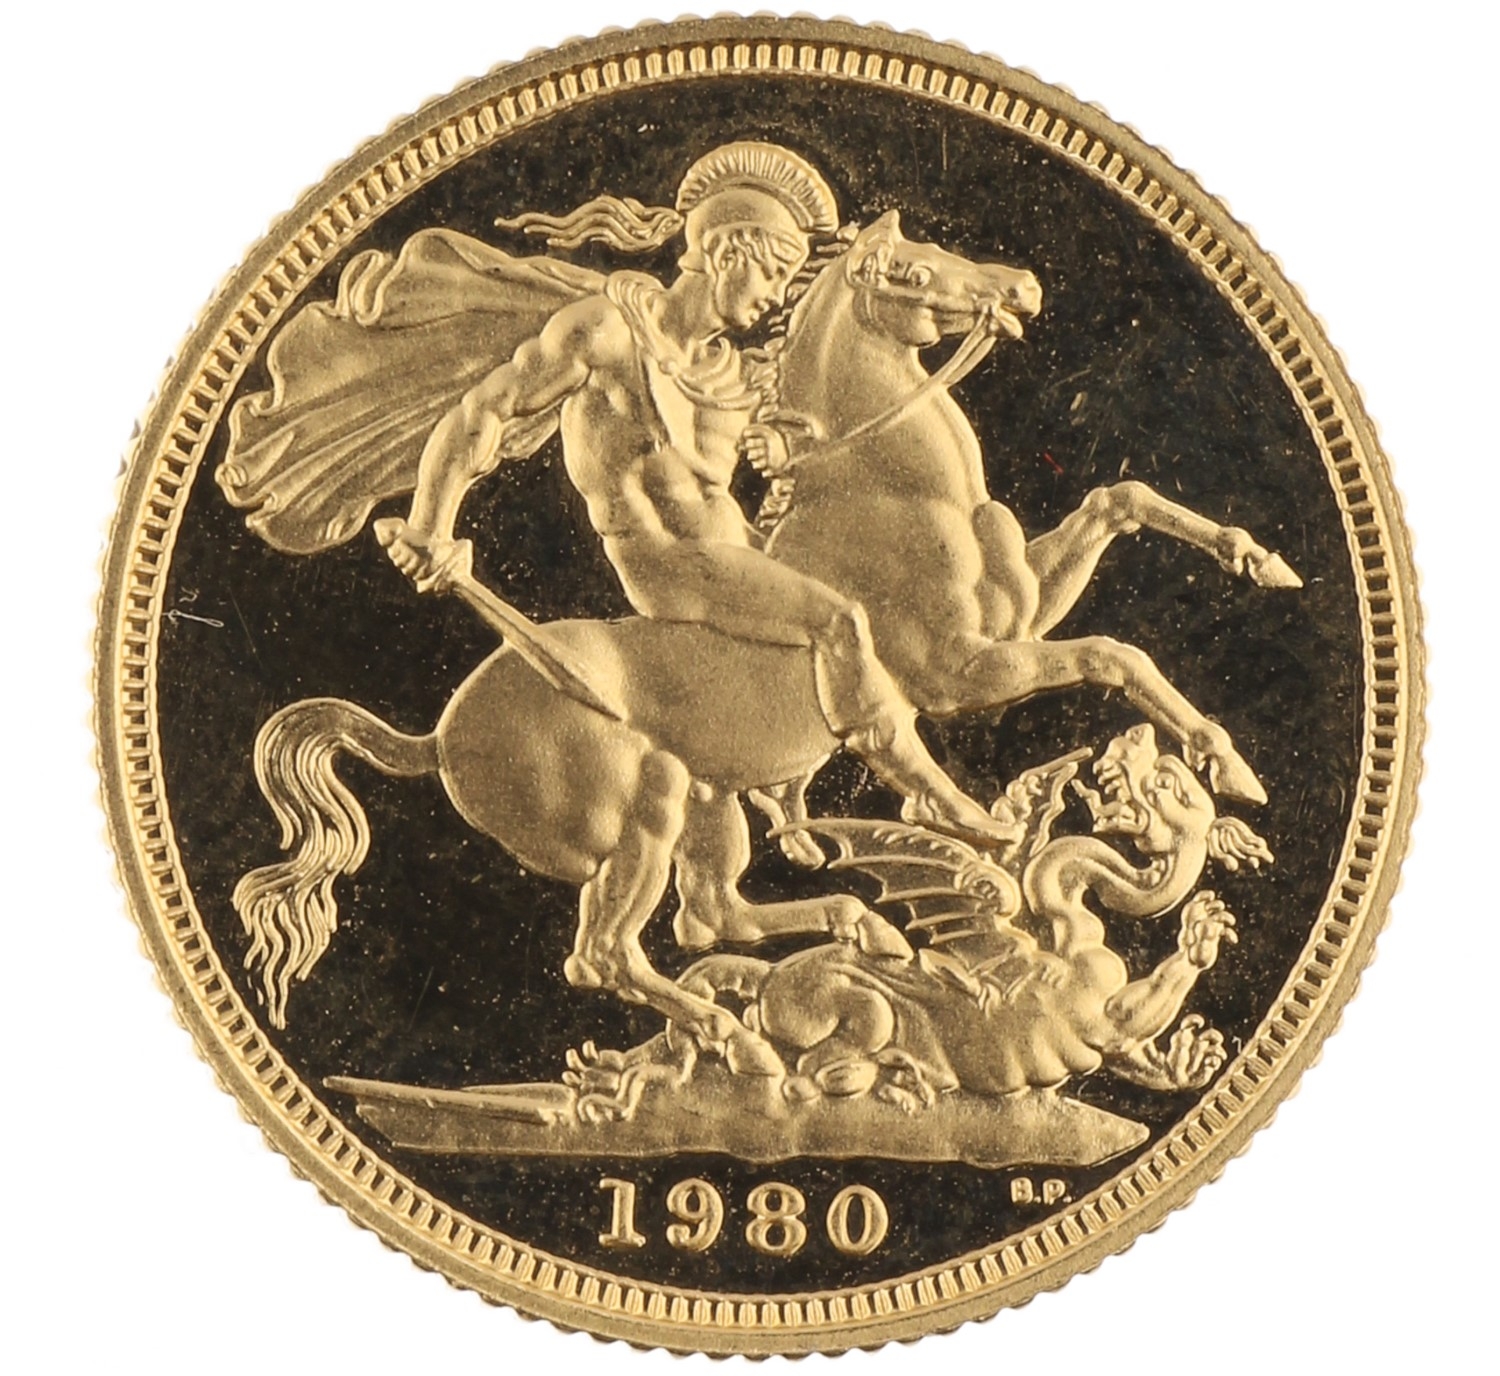 1/2 Sovereign - Great Britain - 1980